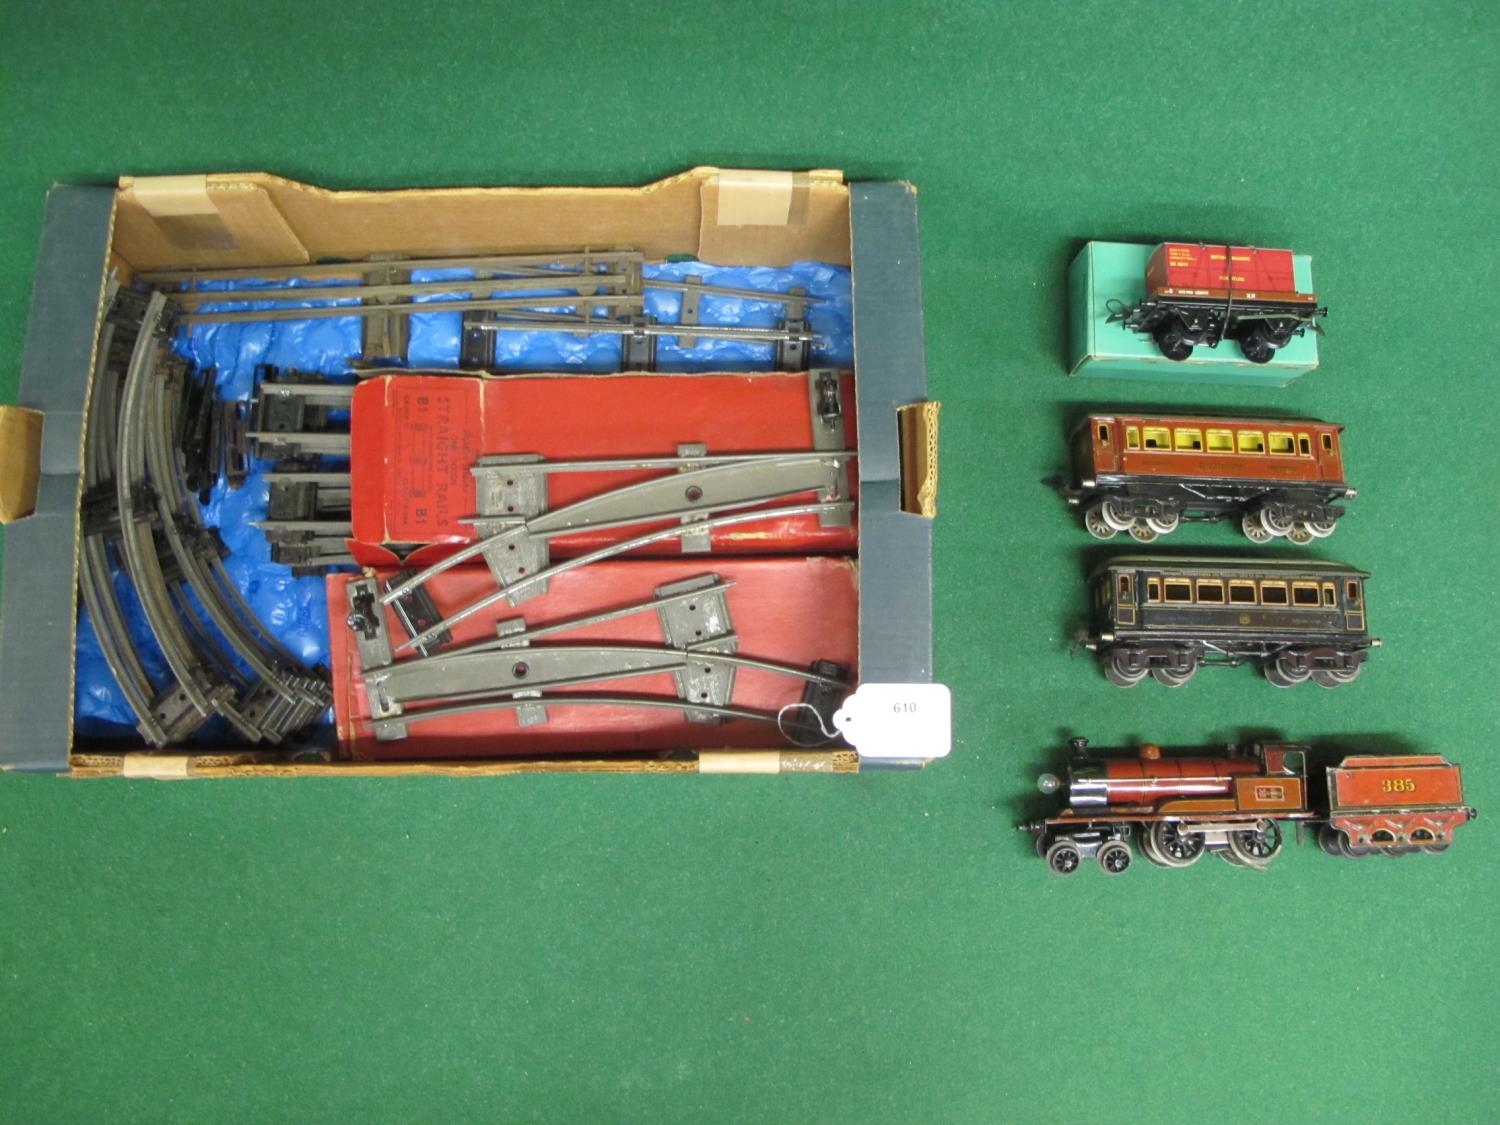 Marklin 4 volt O gauge 4-4-0 locomotive and tender No. 385 in lined red, two Bogie coaches with